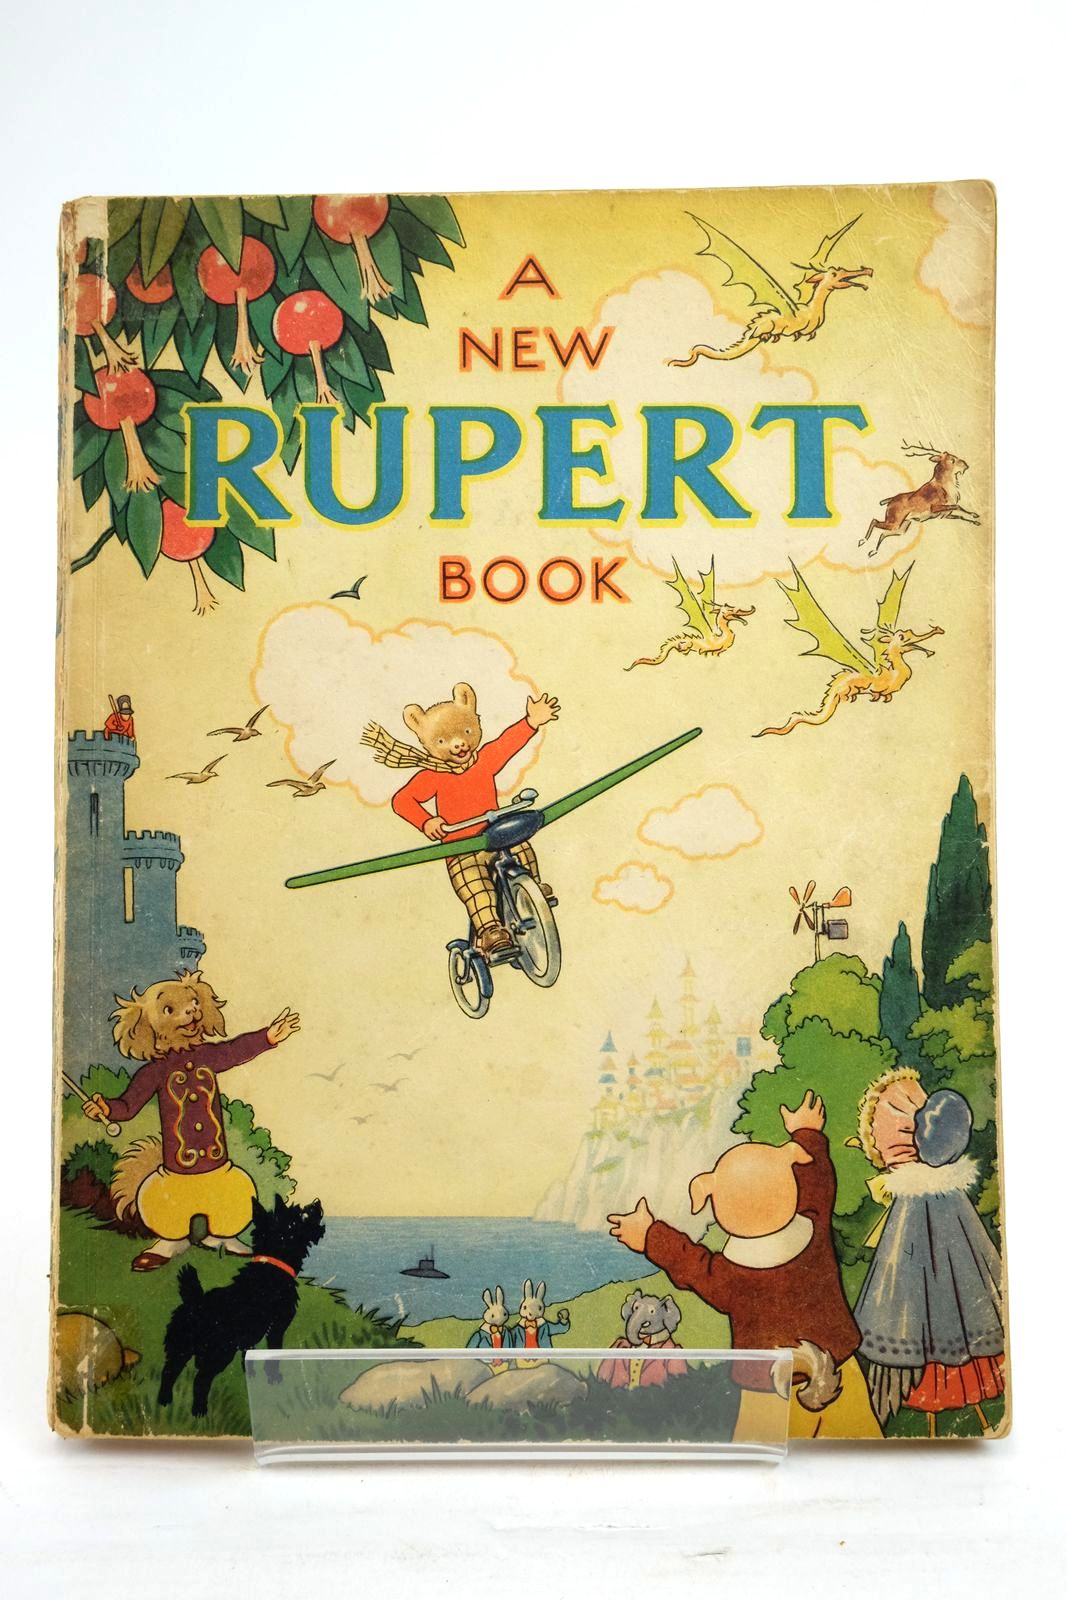 Photo of RUPERT ANNUAL 1945 - A NEW RUPERT BOOK written by Bestall, Alfred illustrated by Bestall, Alfred published by Daily Express (STOCK CODE: 2136926)  for sale by Stella & Rose's Books